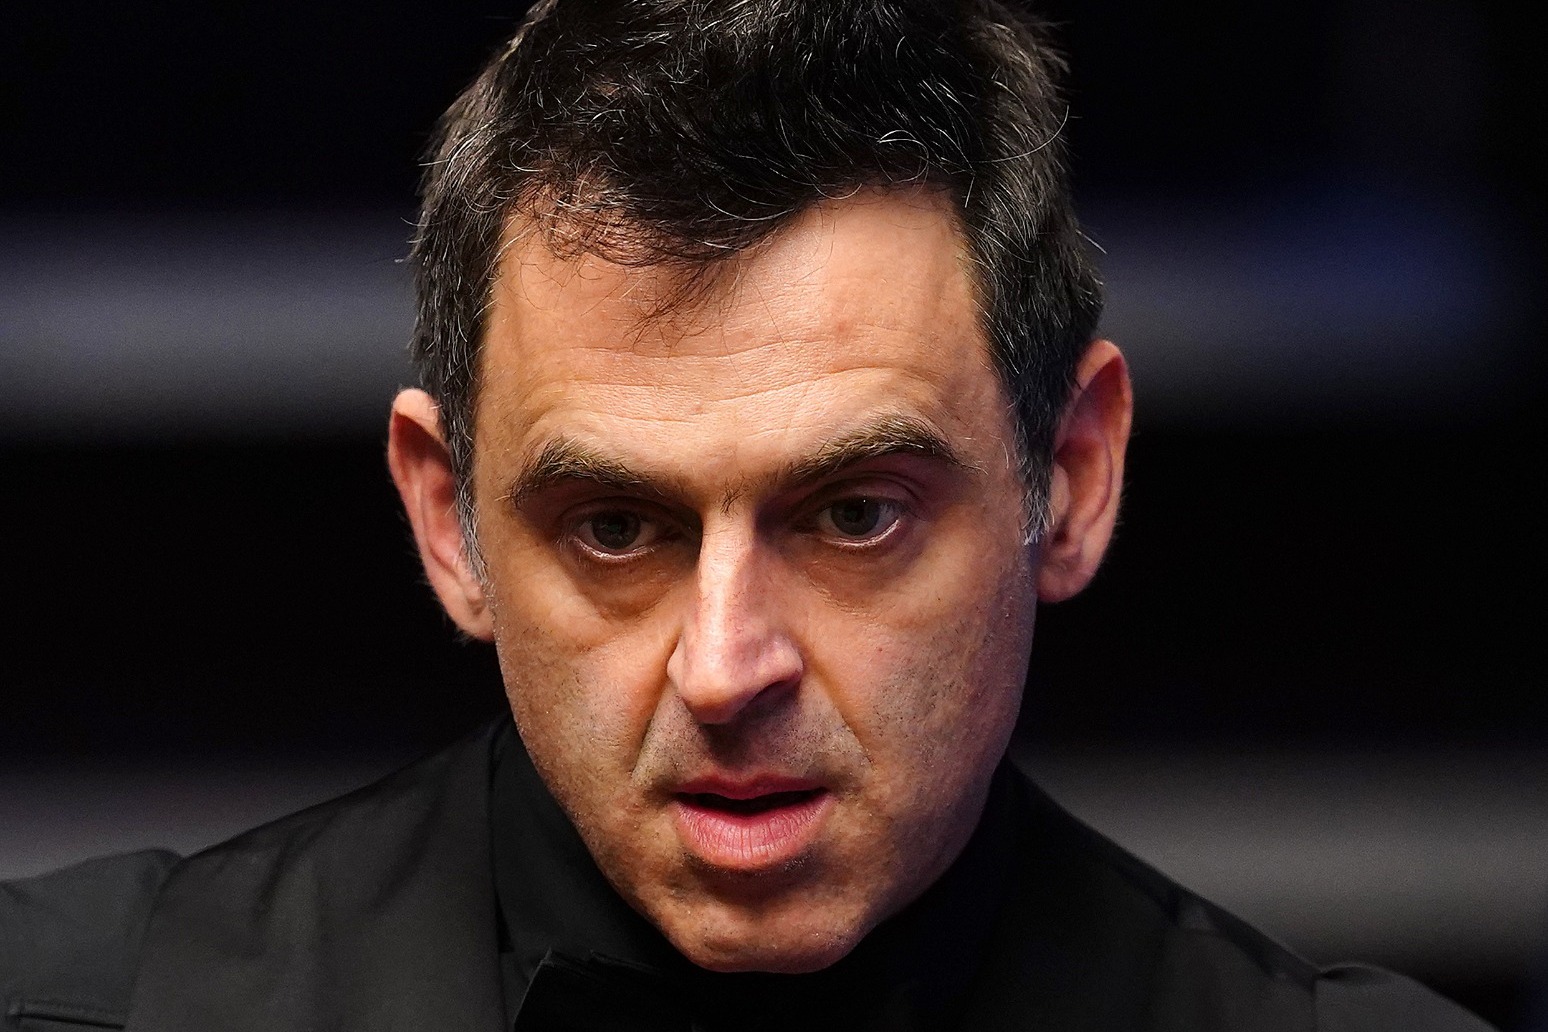 Ronnie O’Sullivan dismisses ‘superstar’ tag after cruising into last four 